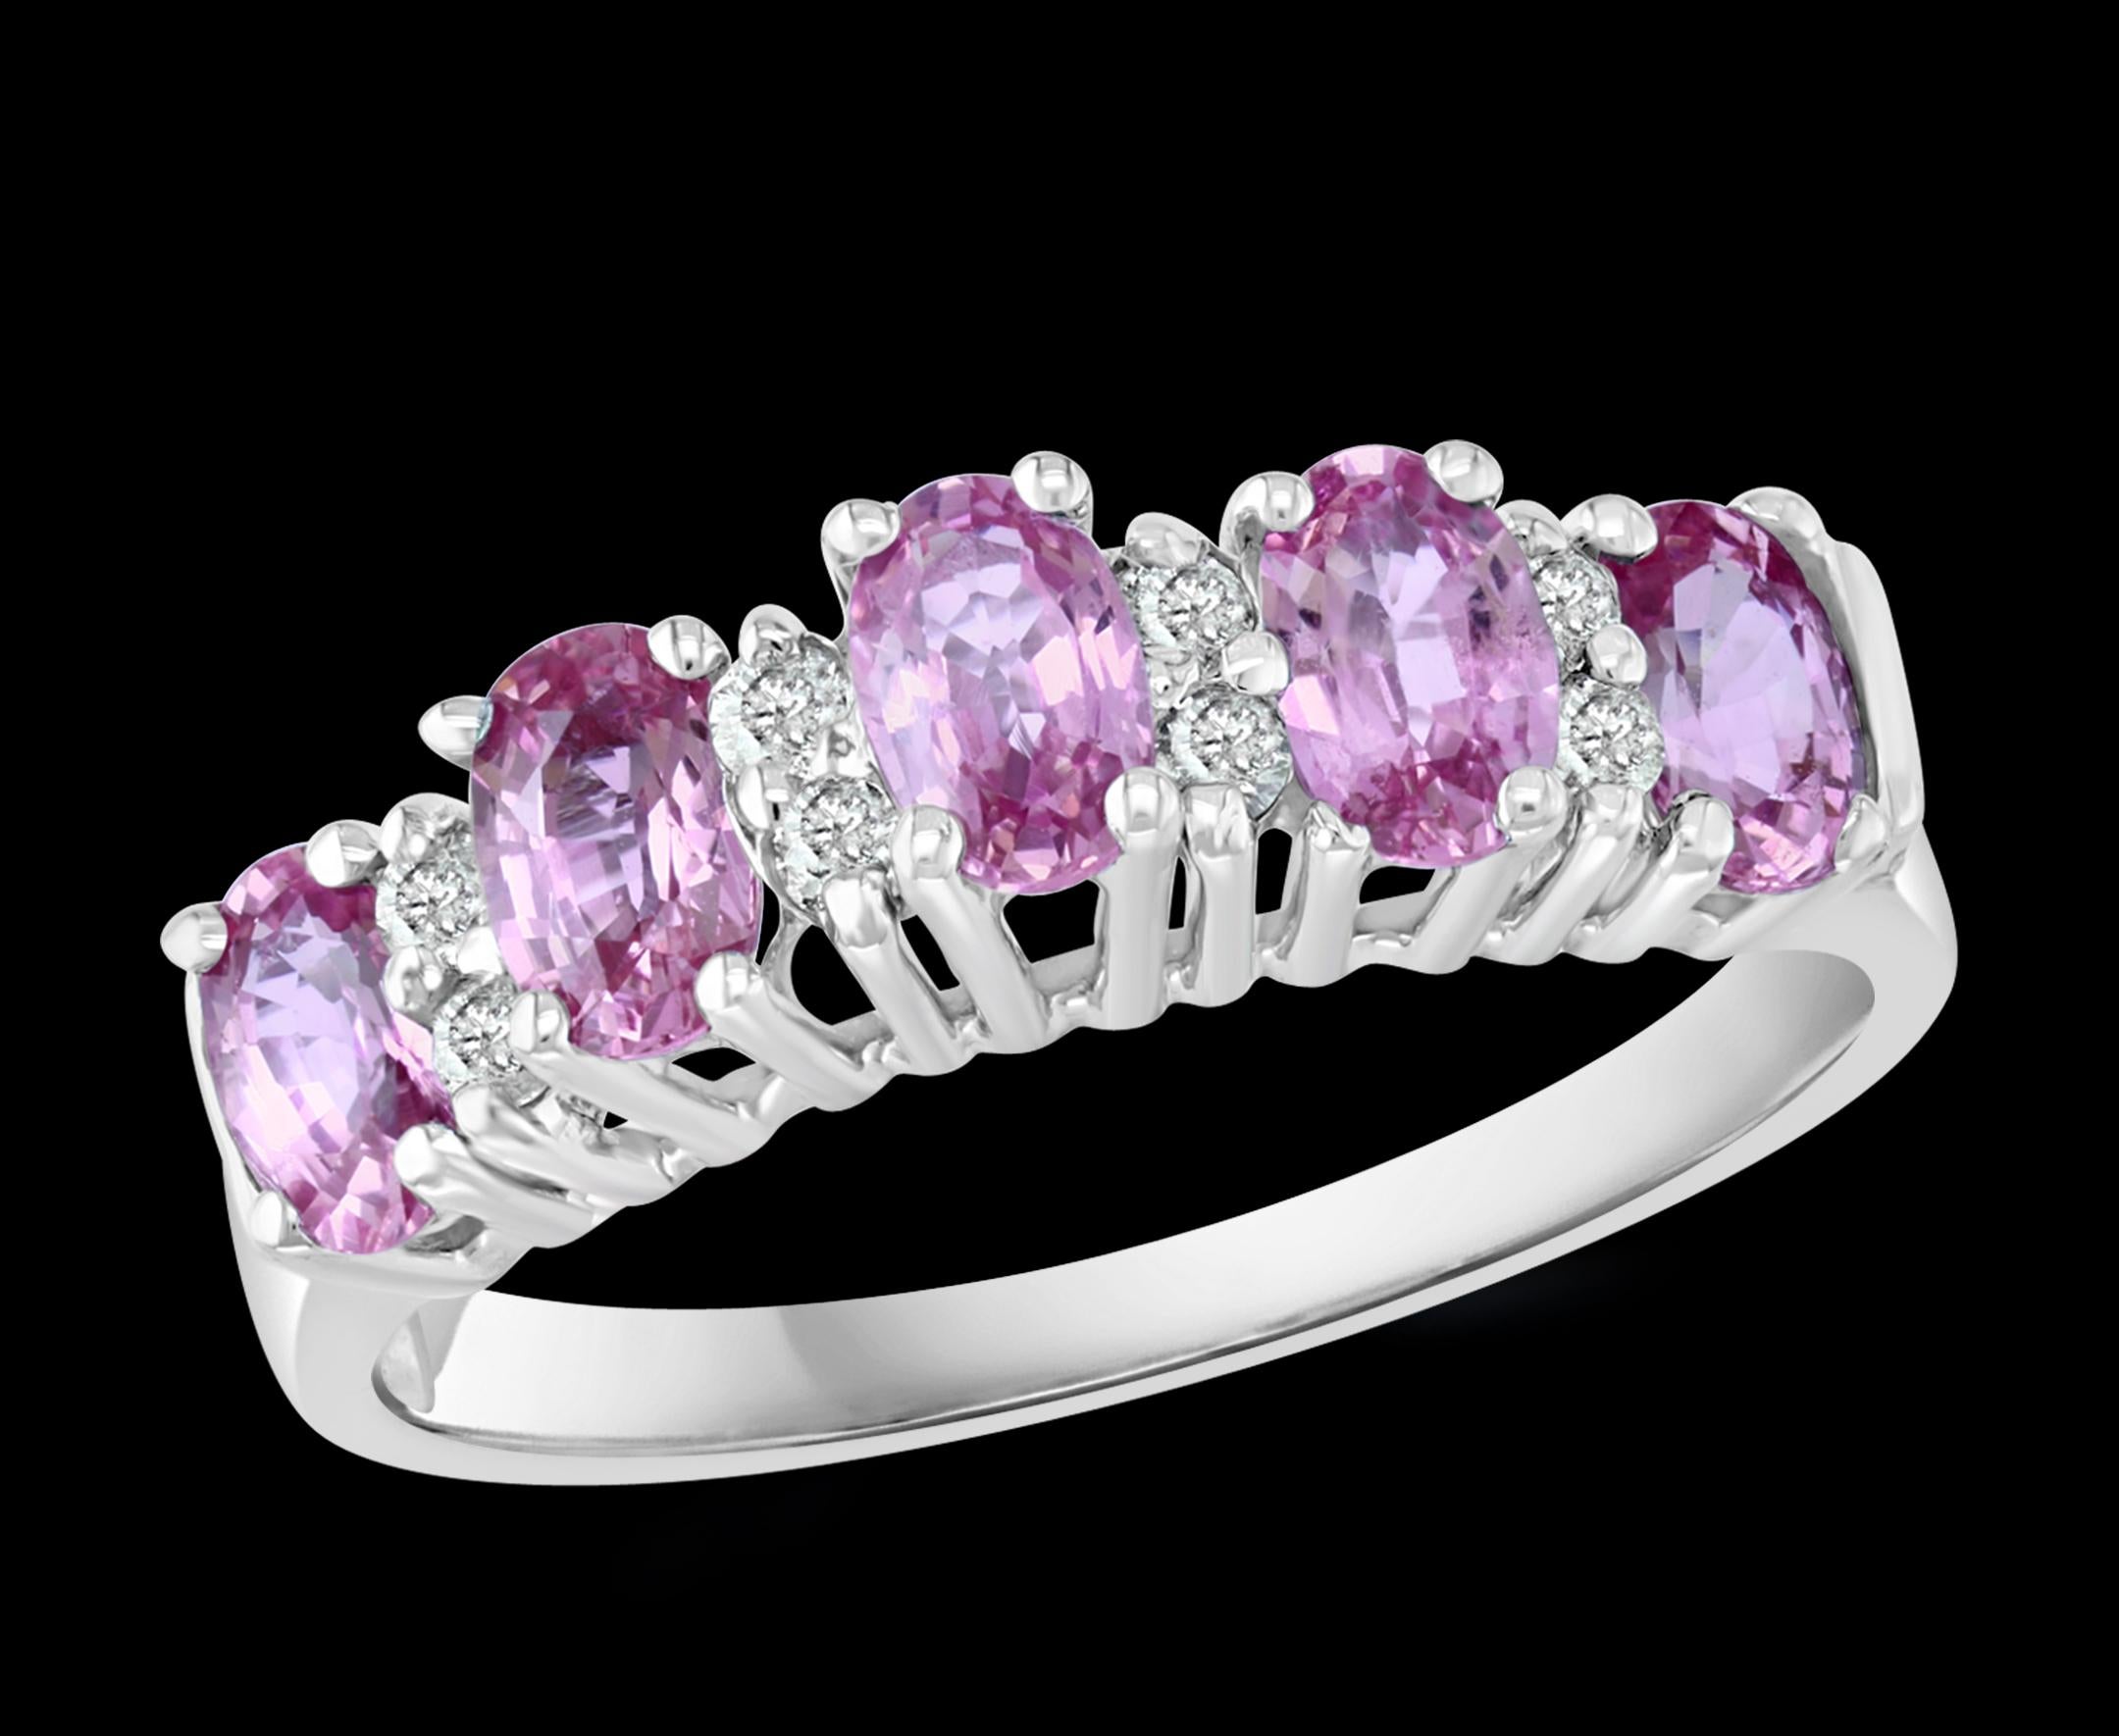 A classic, Cocktail ring 
Approximately 1.25  Ct natural Pink sapphire and Approximately 0.16 Ct  Diamond 14 Karat  White gold   Ring

 All round brilliant cut diamonds
14 Karat White  Gold: 3.1  Grams
 Stamped  for 14 K Gold
Ring Size 6  ( can be